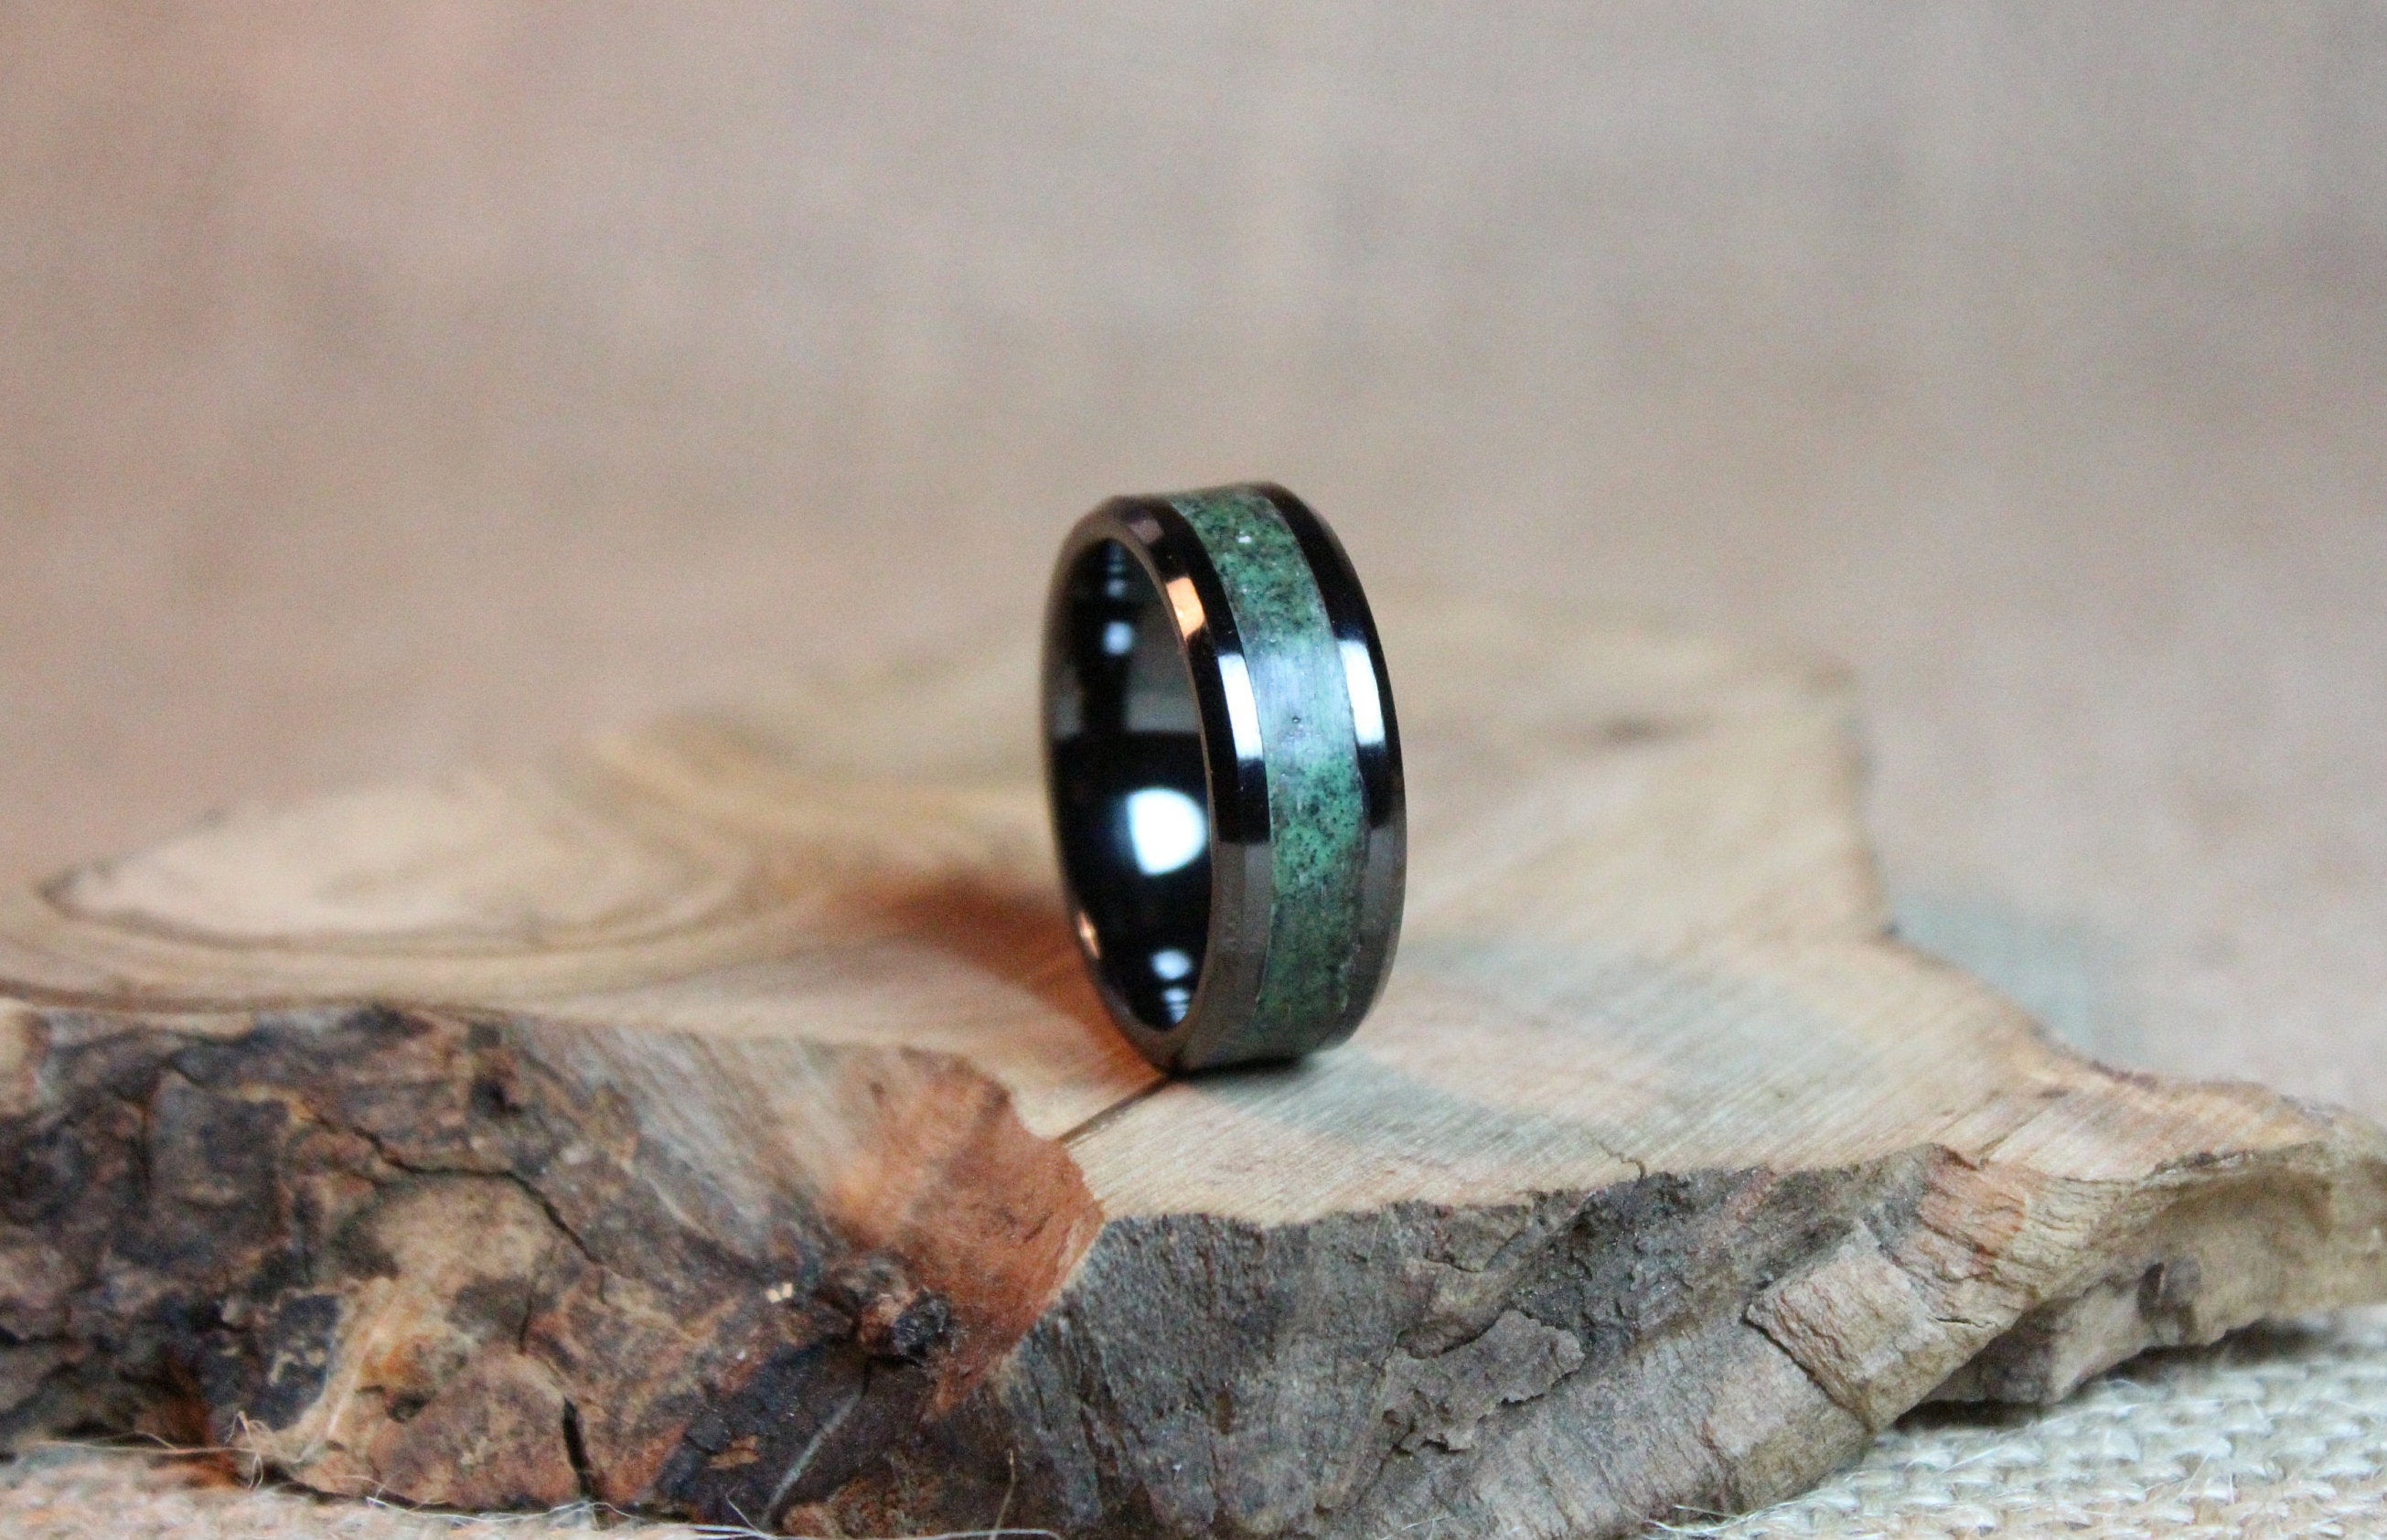 Buy Glowstone Ring Online In India - Etsy India